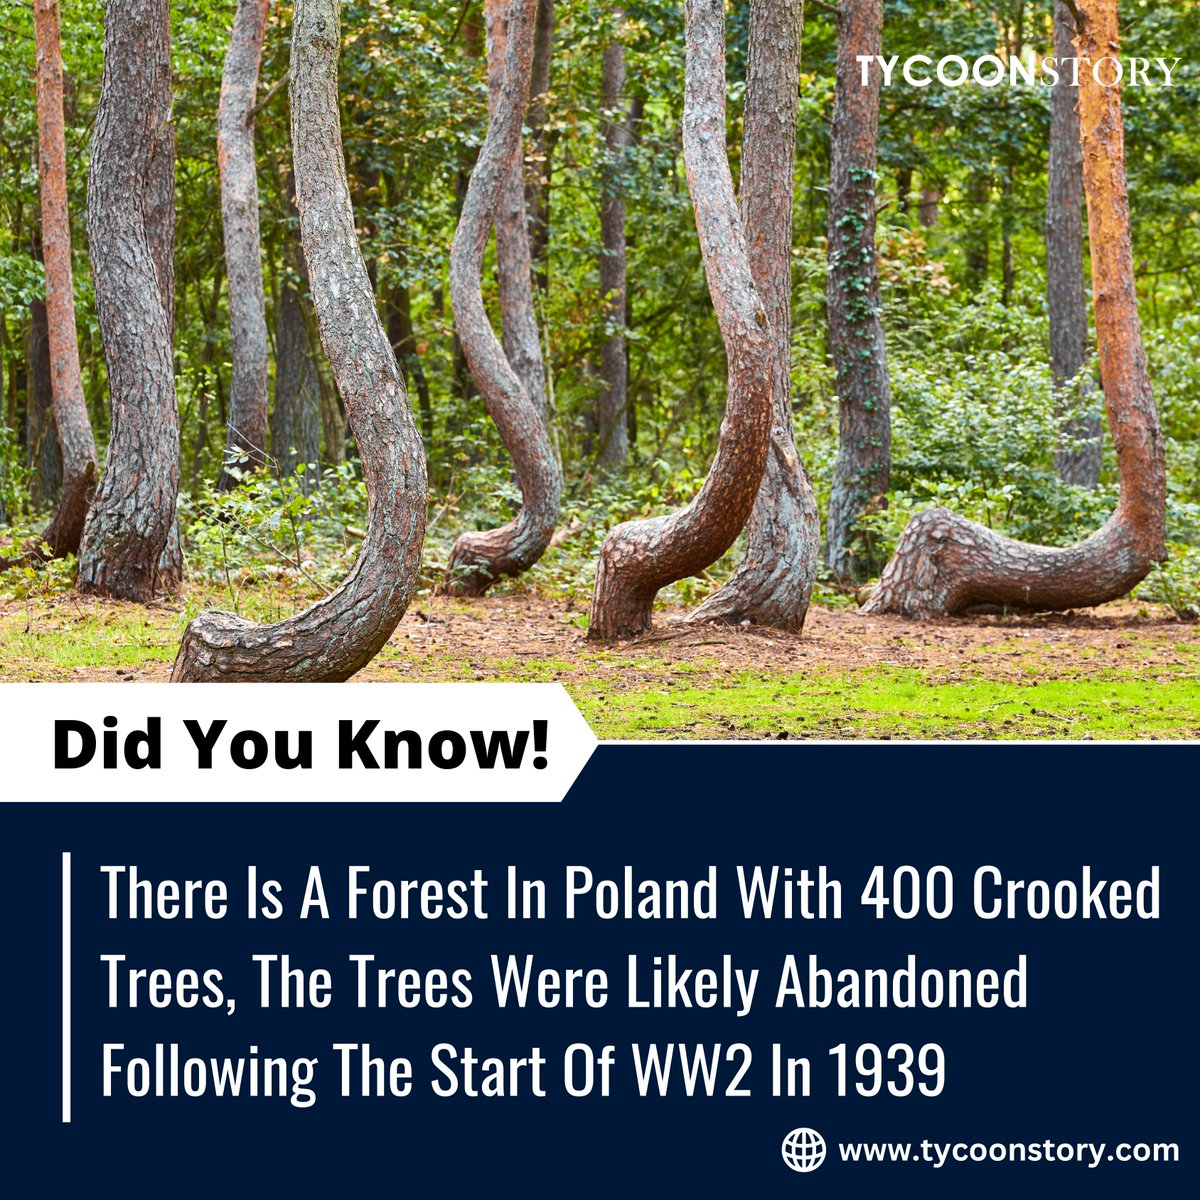 The Mysterious Crooked Forest of Poland: A Natural Wonder

#crookedforest #gryfino #poland #naturalwonder #mystery #pinetrees #unusualtrees #travelpoland #touristdestination #naturelovers #explorenature @TycoonStoryCo @tycoonstory2020 @Nature @MSN @Discovery @Poland